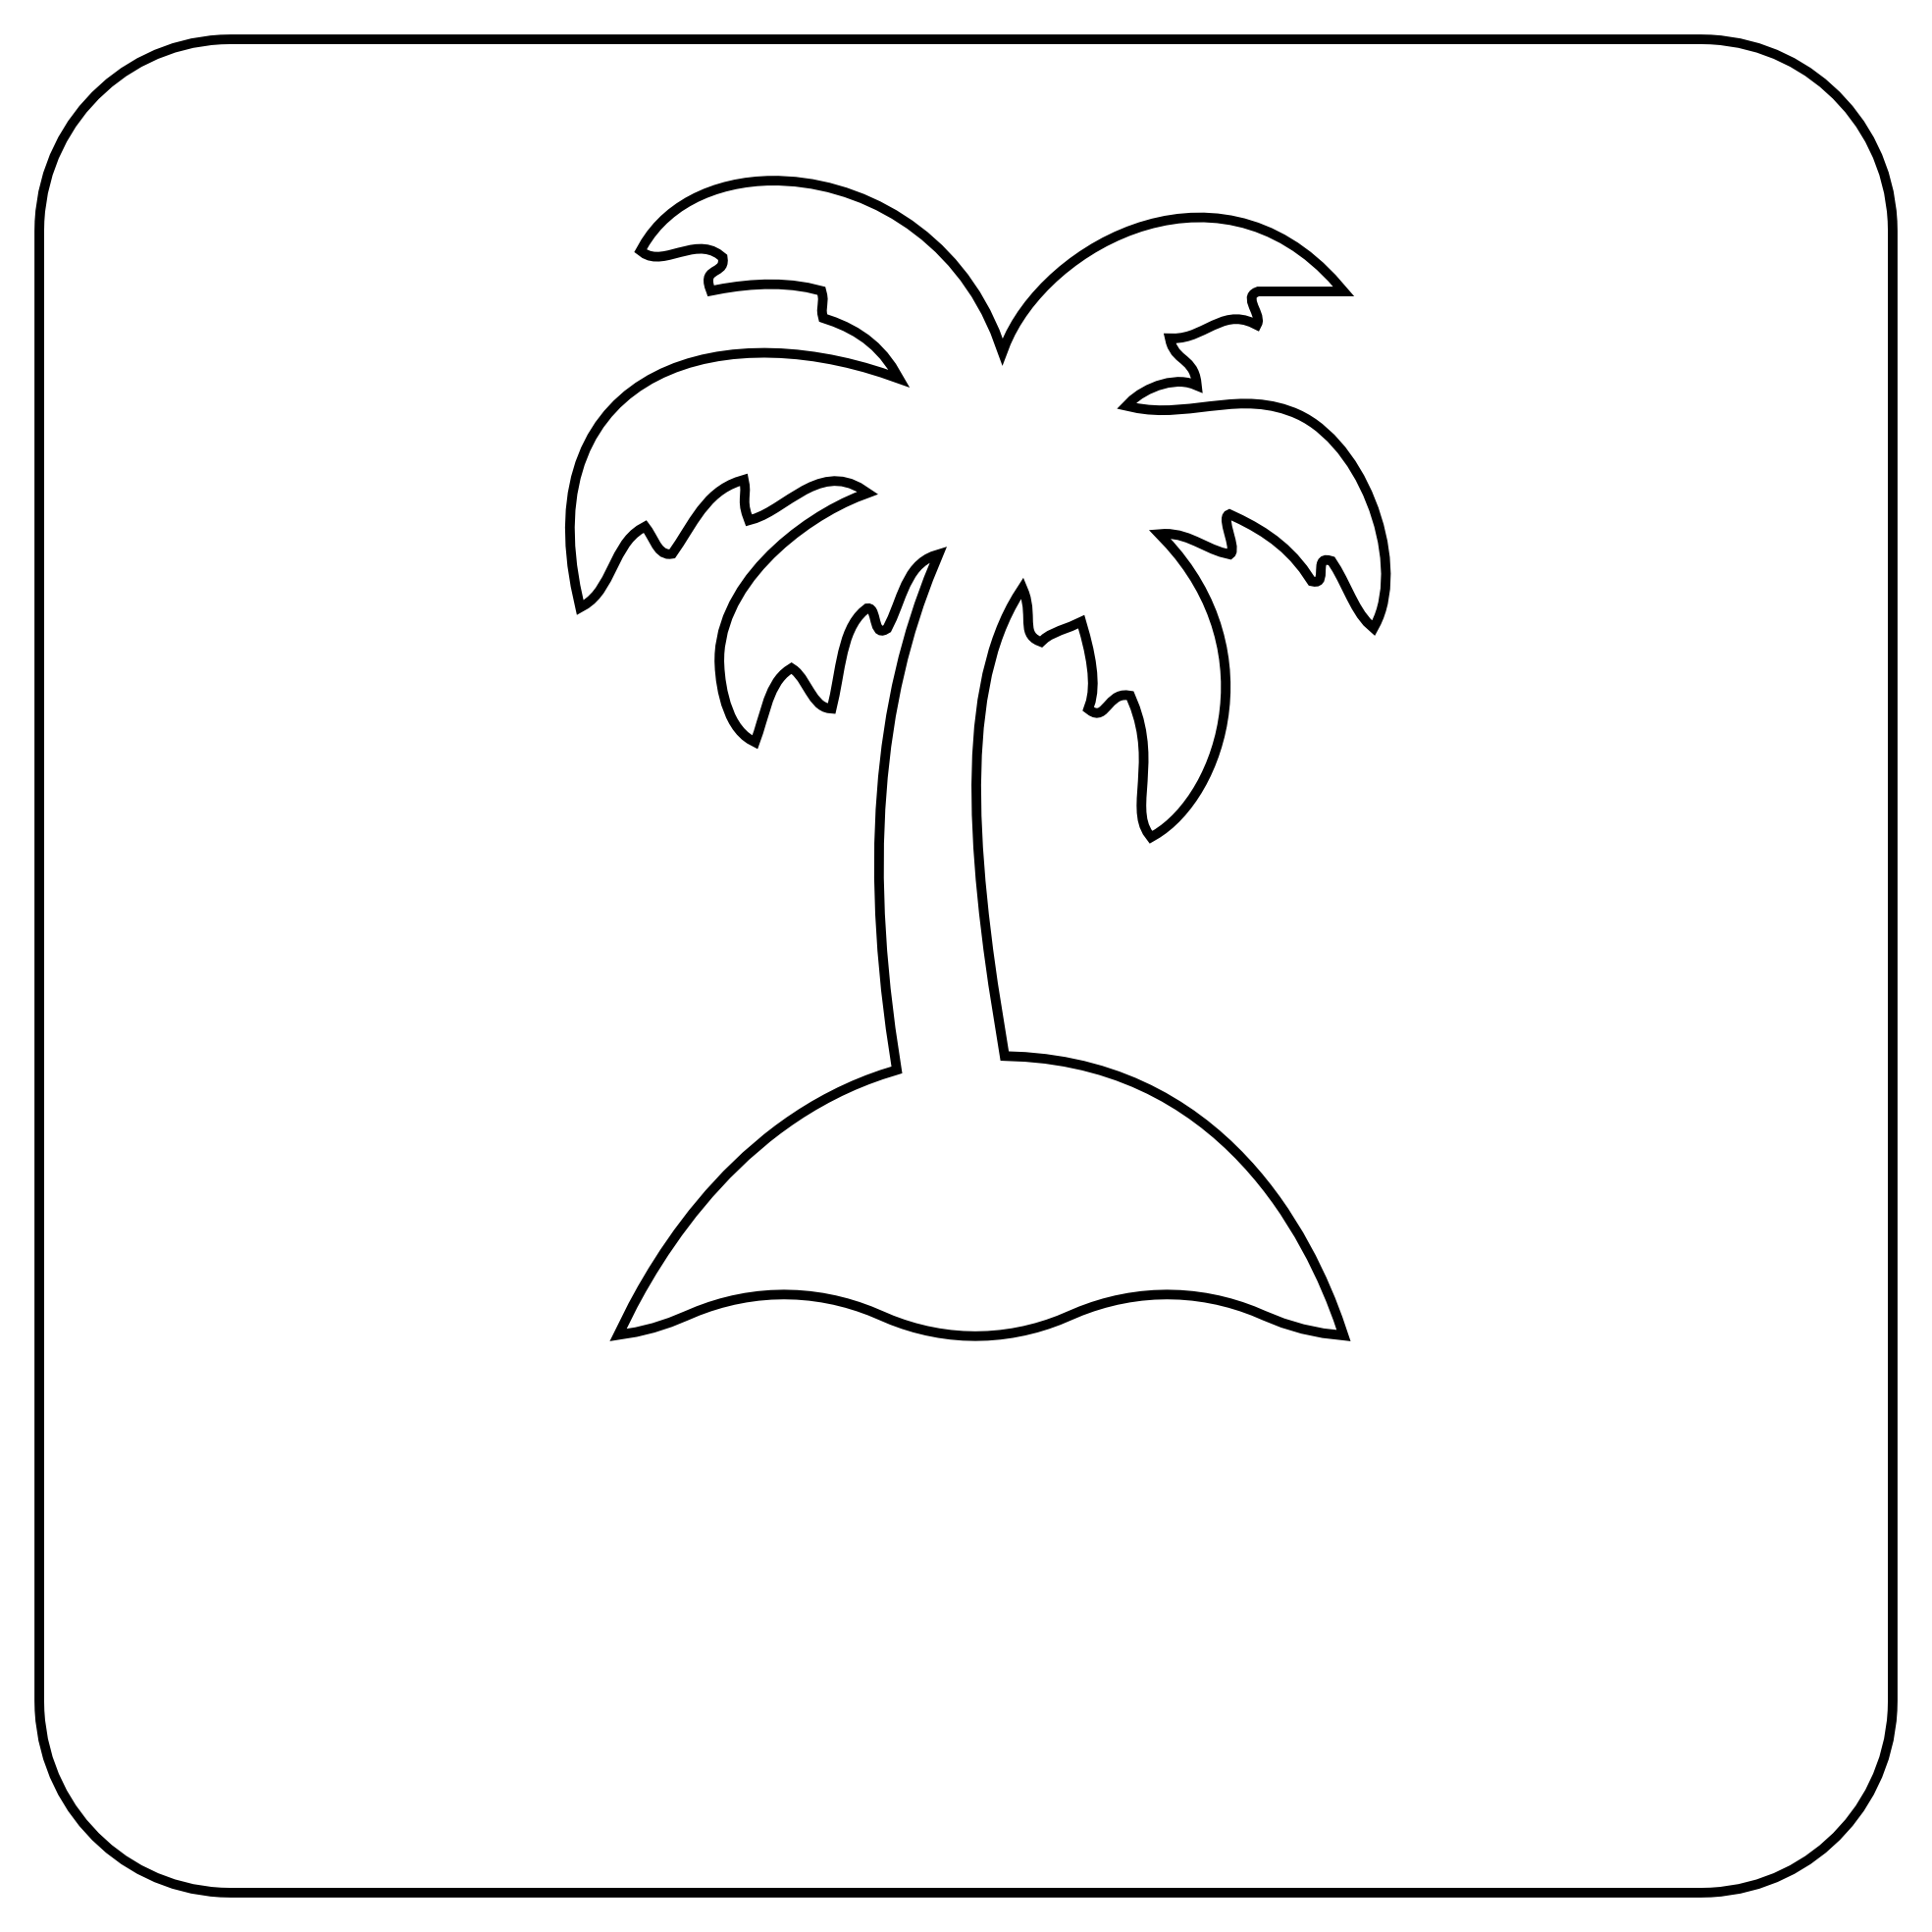 Pine Tree Clipart Black And White Tree Clipart Black And White2012